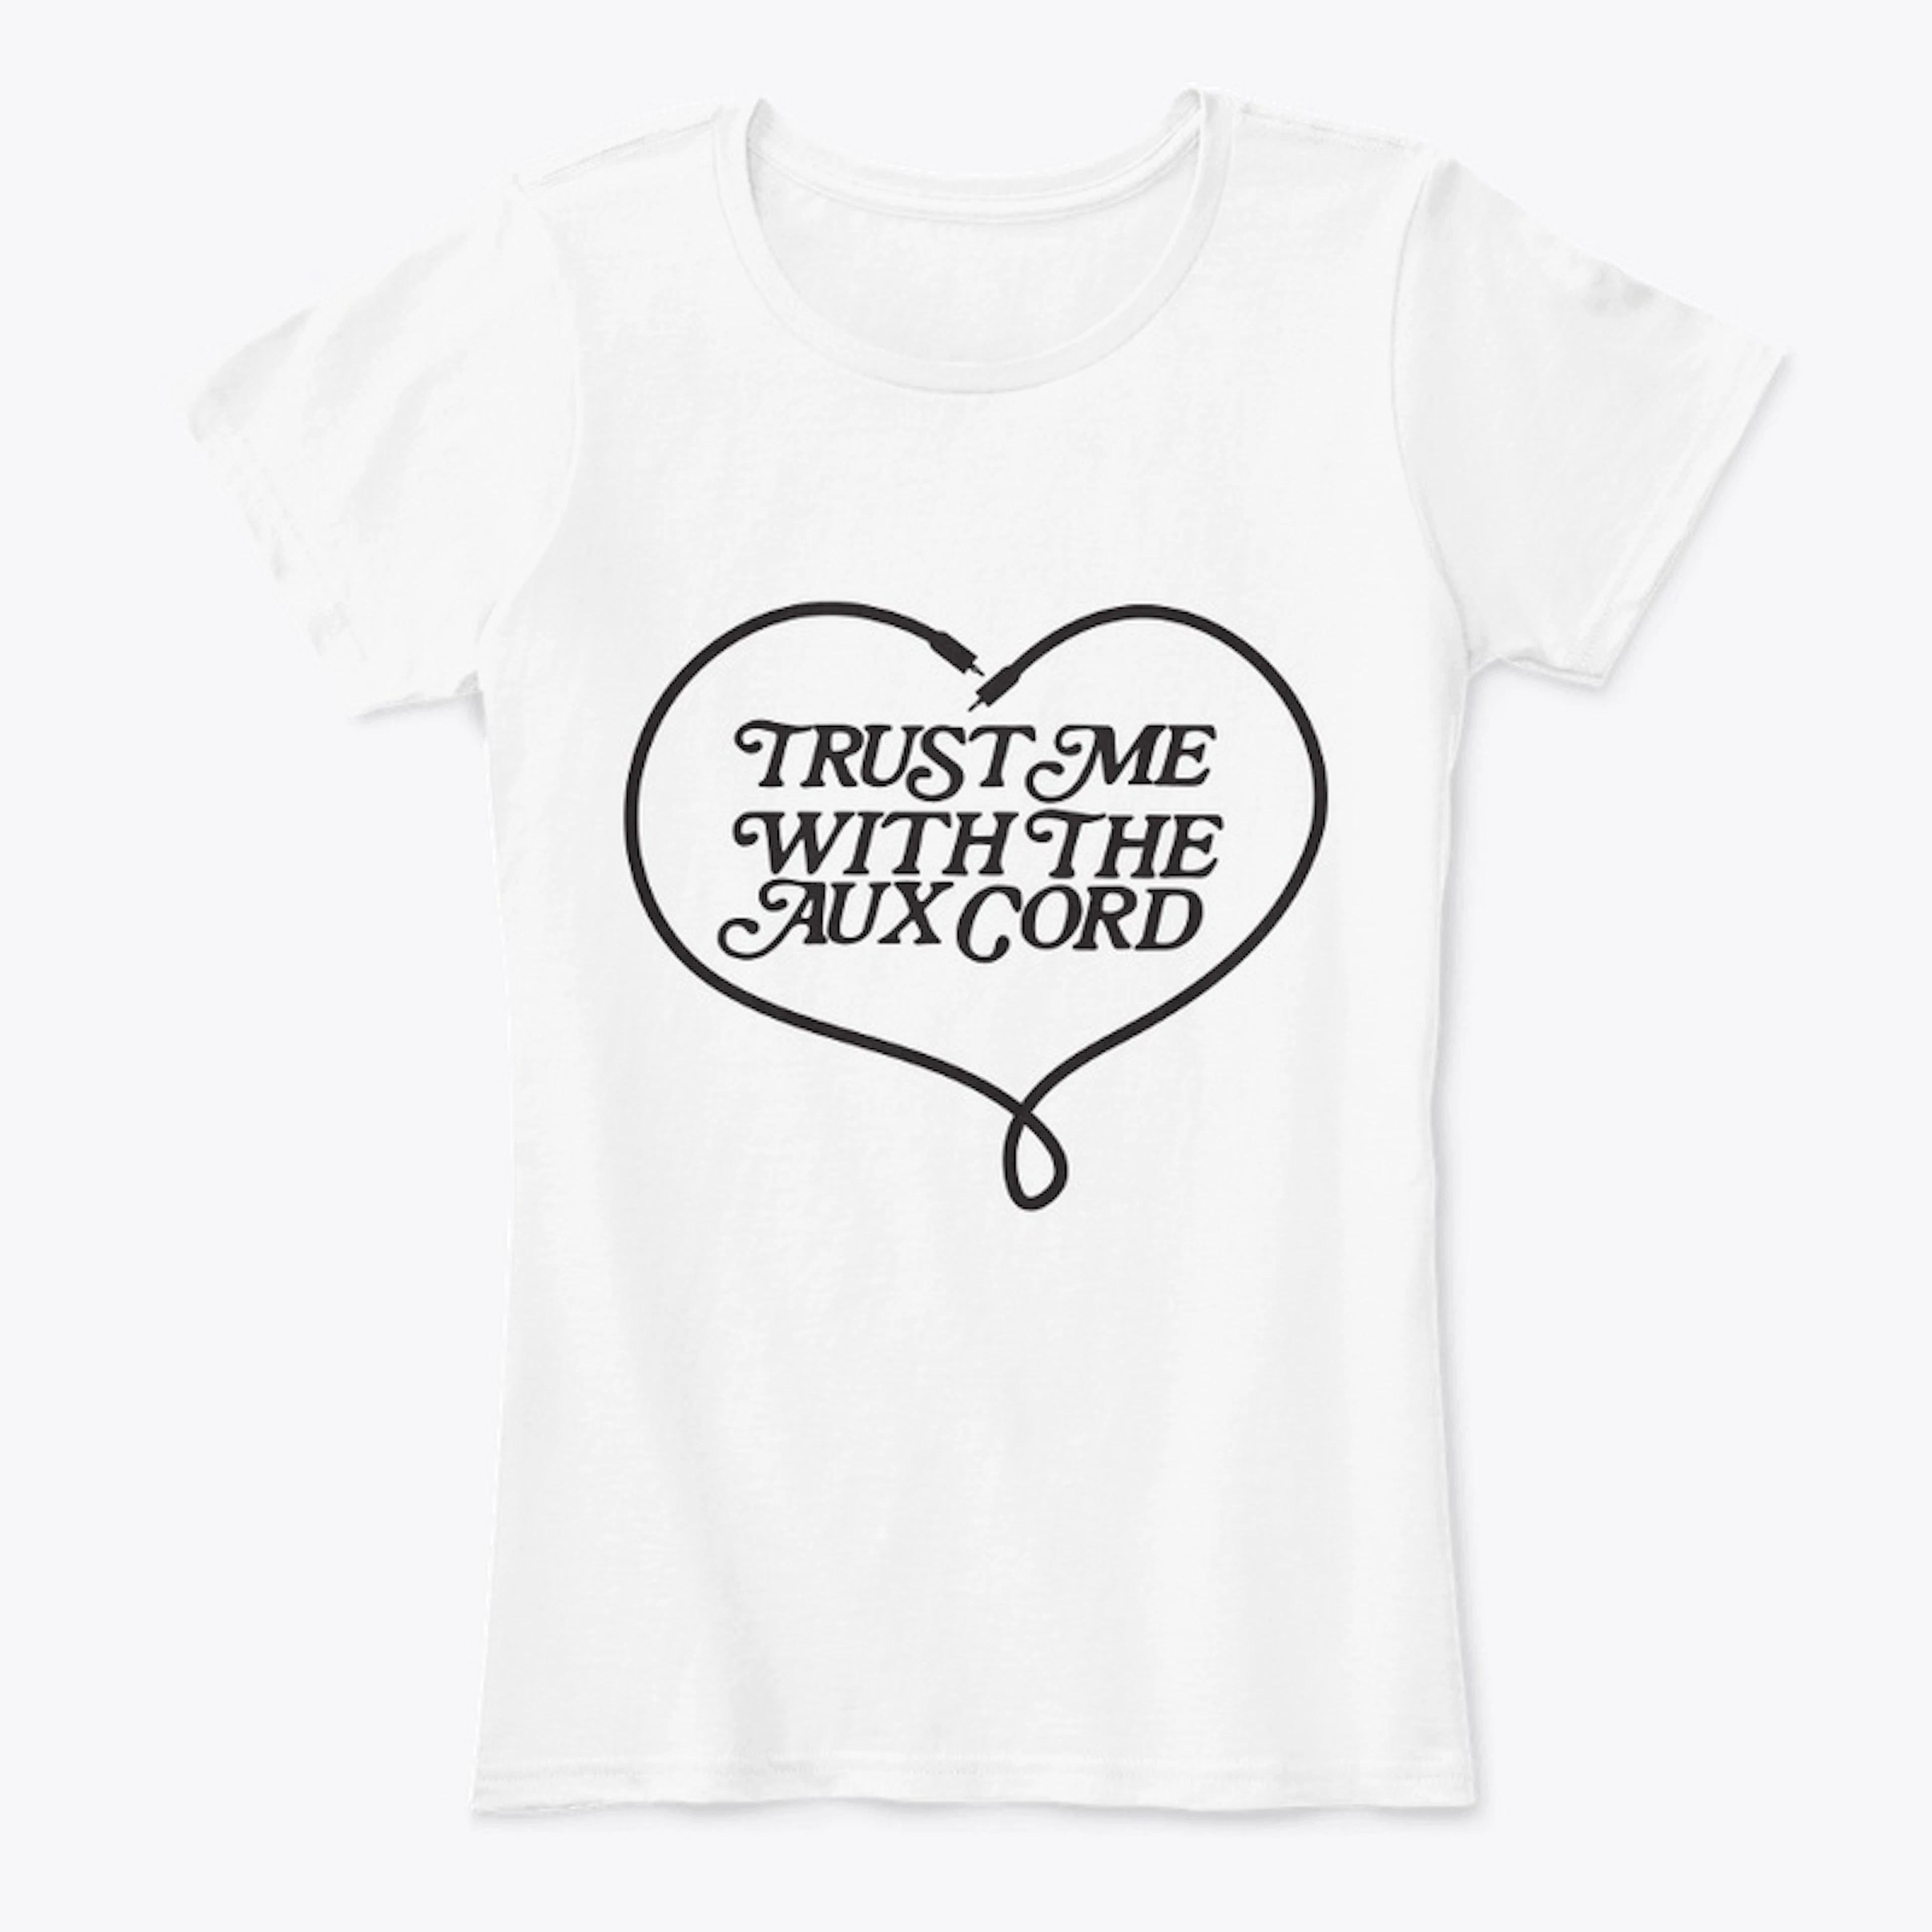 Ladies Tee: Trust me with the AUX cord